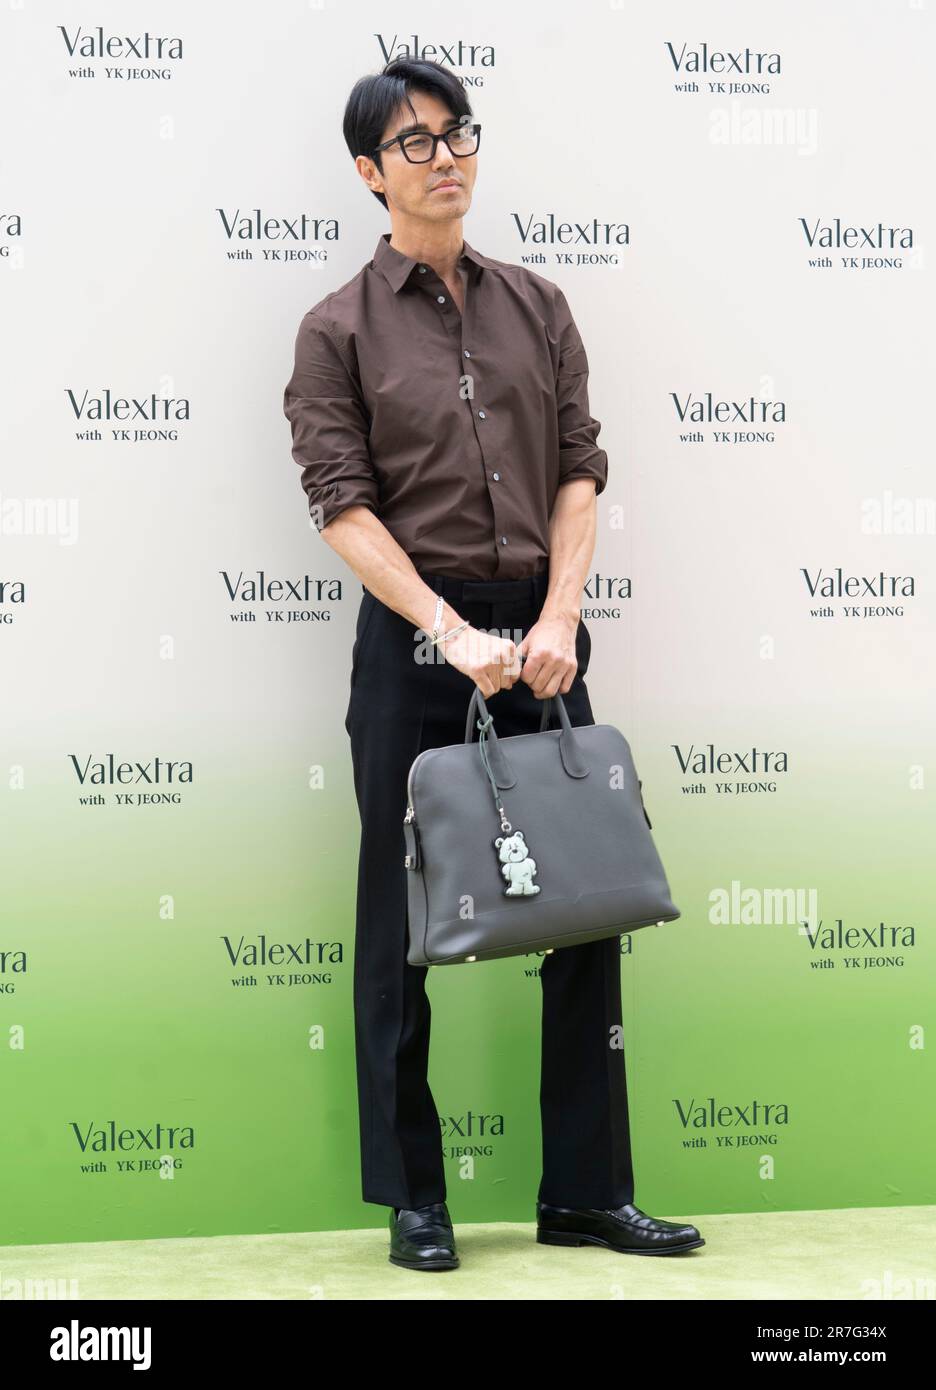 Seoul, South Korea. 15th June, 2023. South Korean actor Cha Seung-won, attends a photocall for the ‘Valextra' with YK Jeong event in Seoul, South Korea on June 15, 2023. (Photo by: Lee Young-ho/Sipa USA) Credit: Sipa USA/Alamy Live News Stock Photo